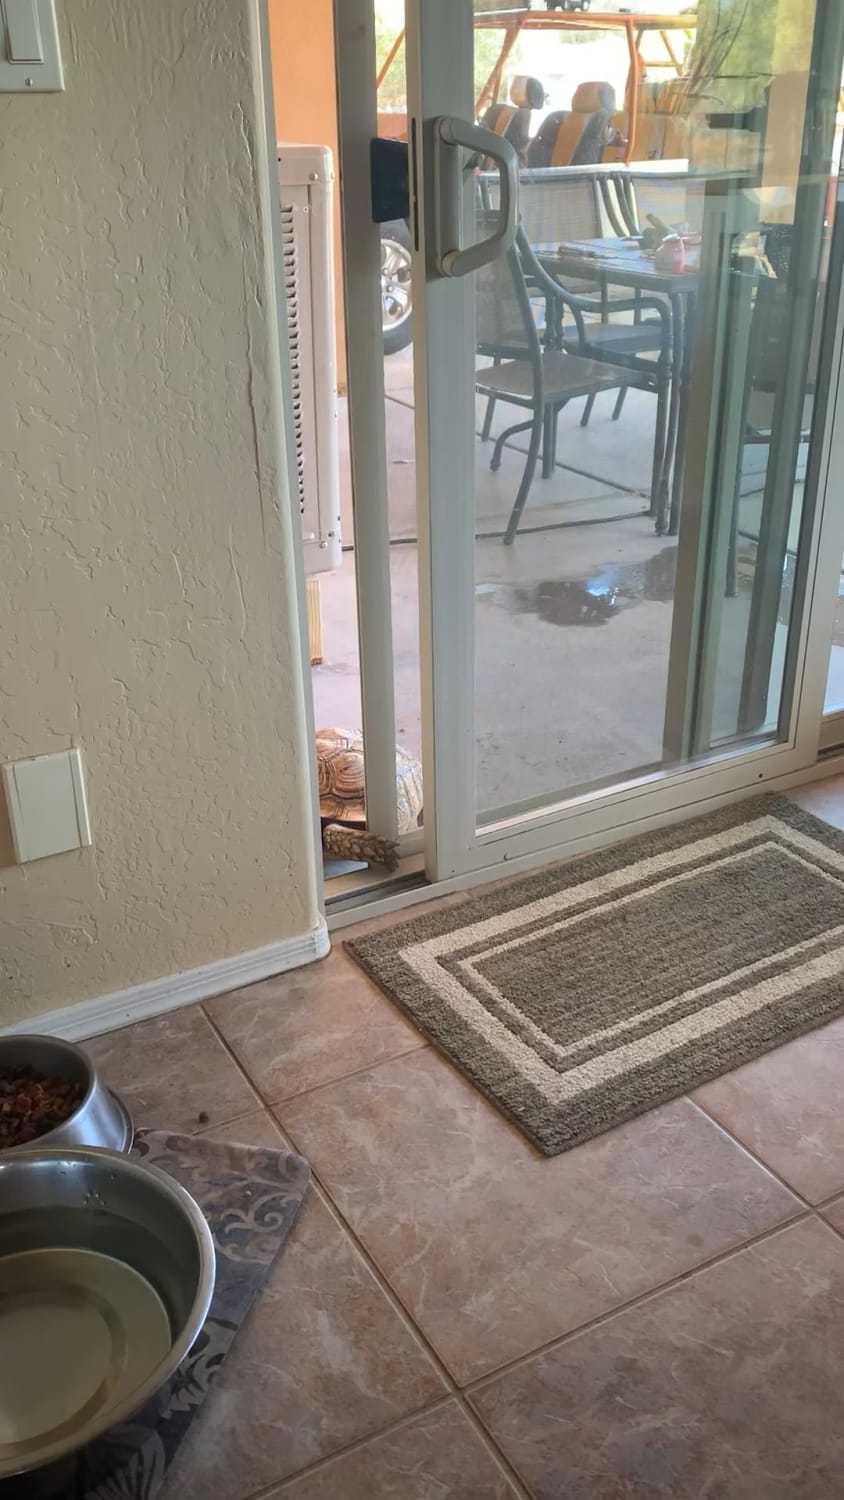 Finally figured out how my tortoise was getting into the house all by himself!